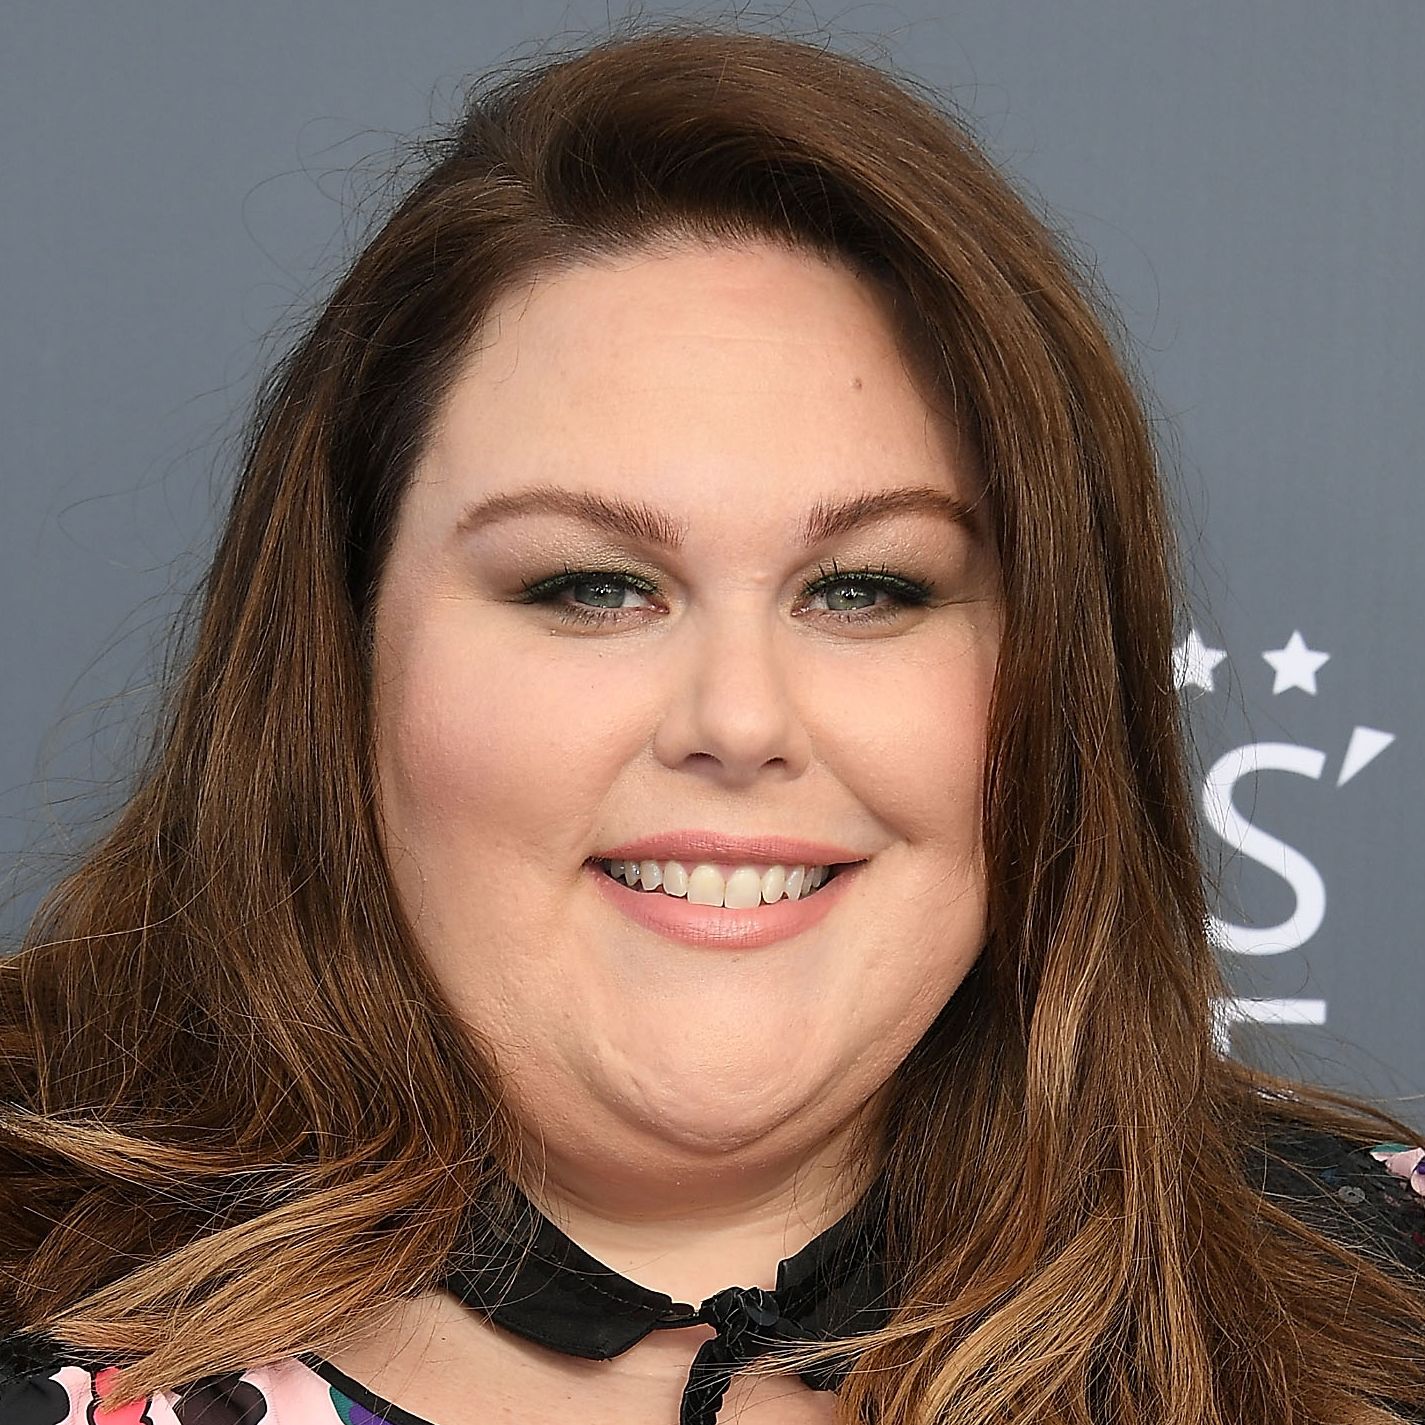 Chrissy Metz Opens Up On The Struggle Of Being Plus-Size In Hollywood